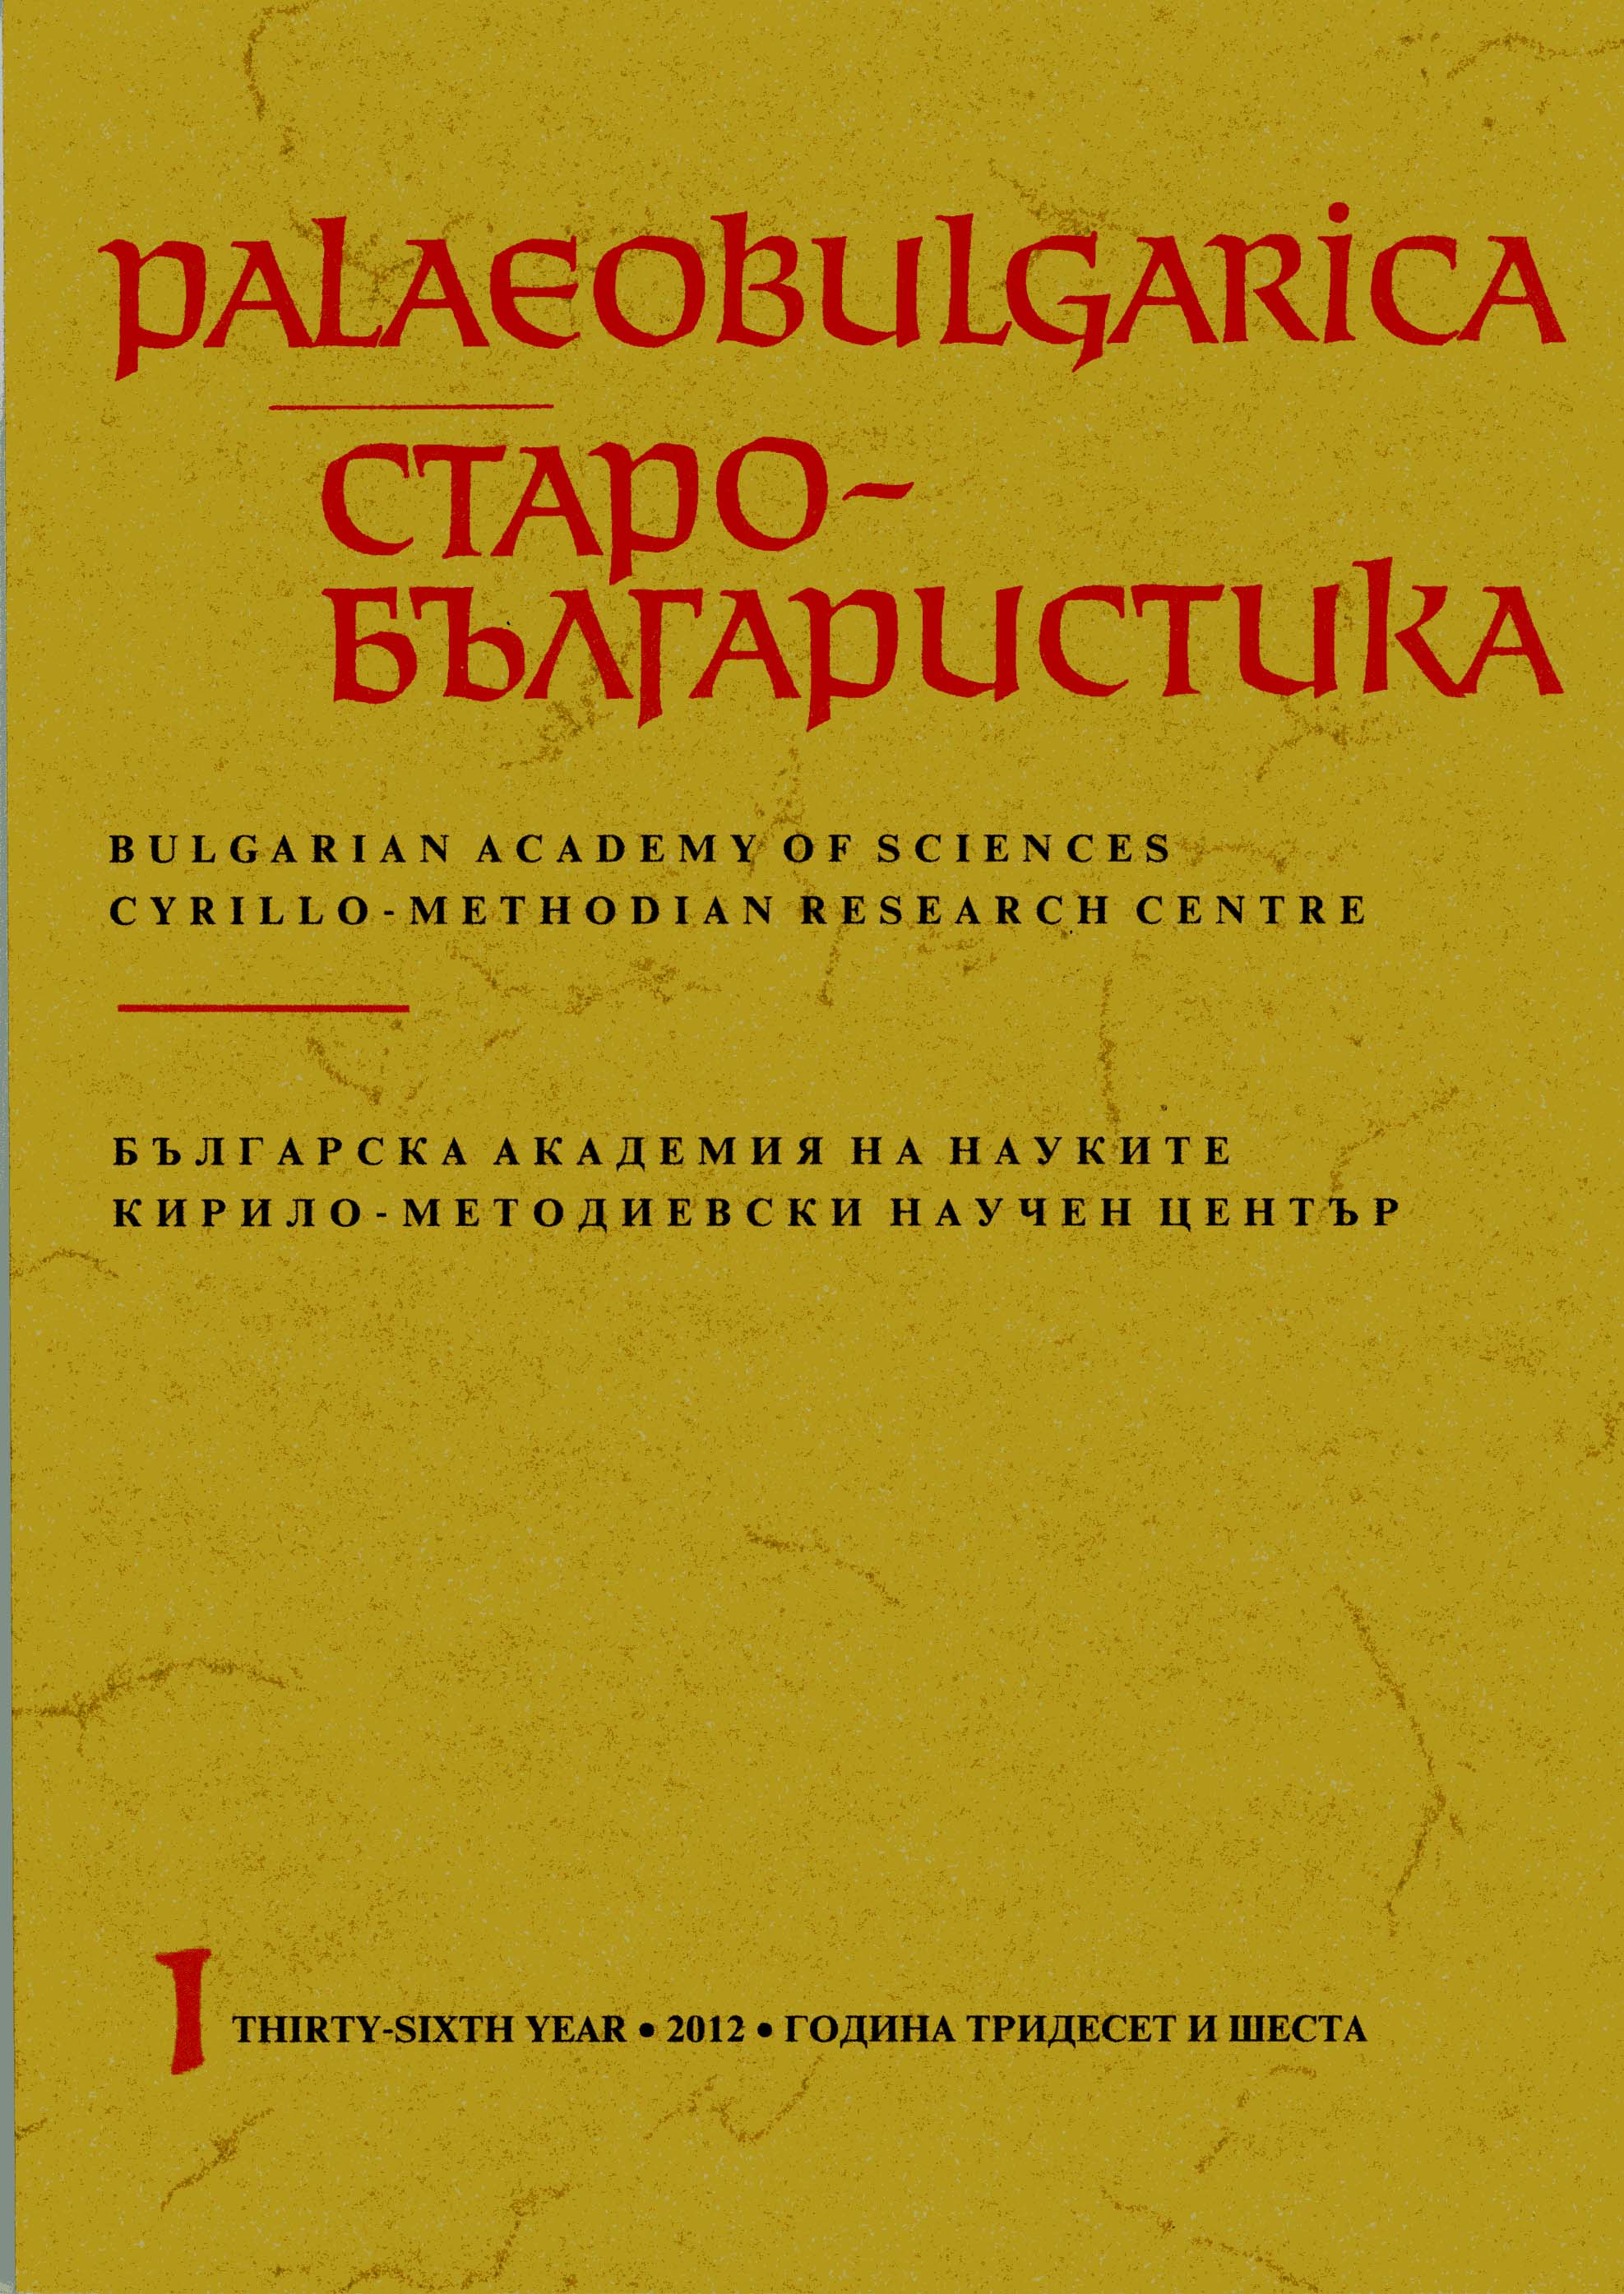 Modern Correspondences to the Old Bulgarian Vowels in the Speech of Golo Bardo, Albani Cover Image